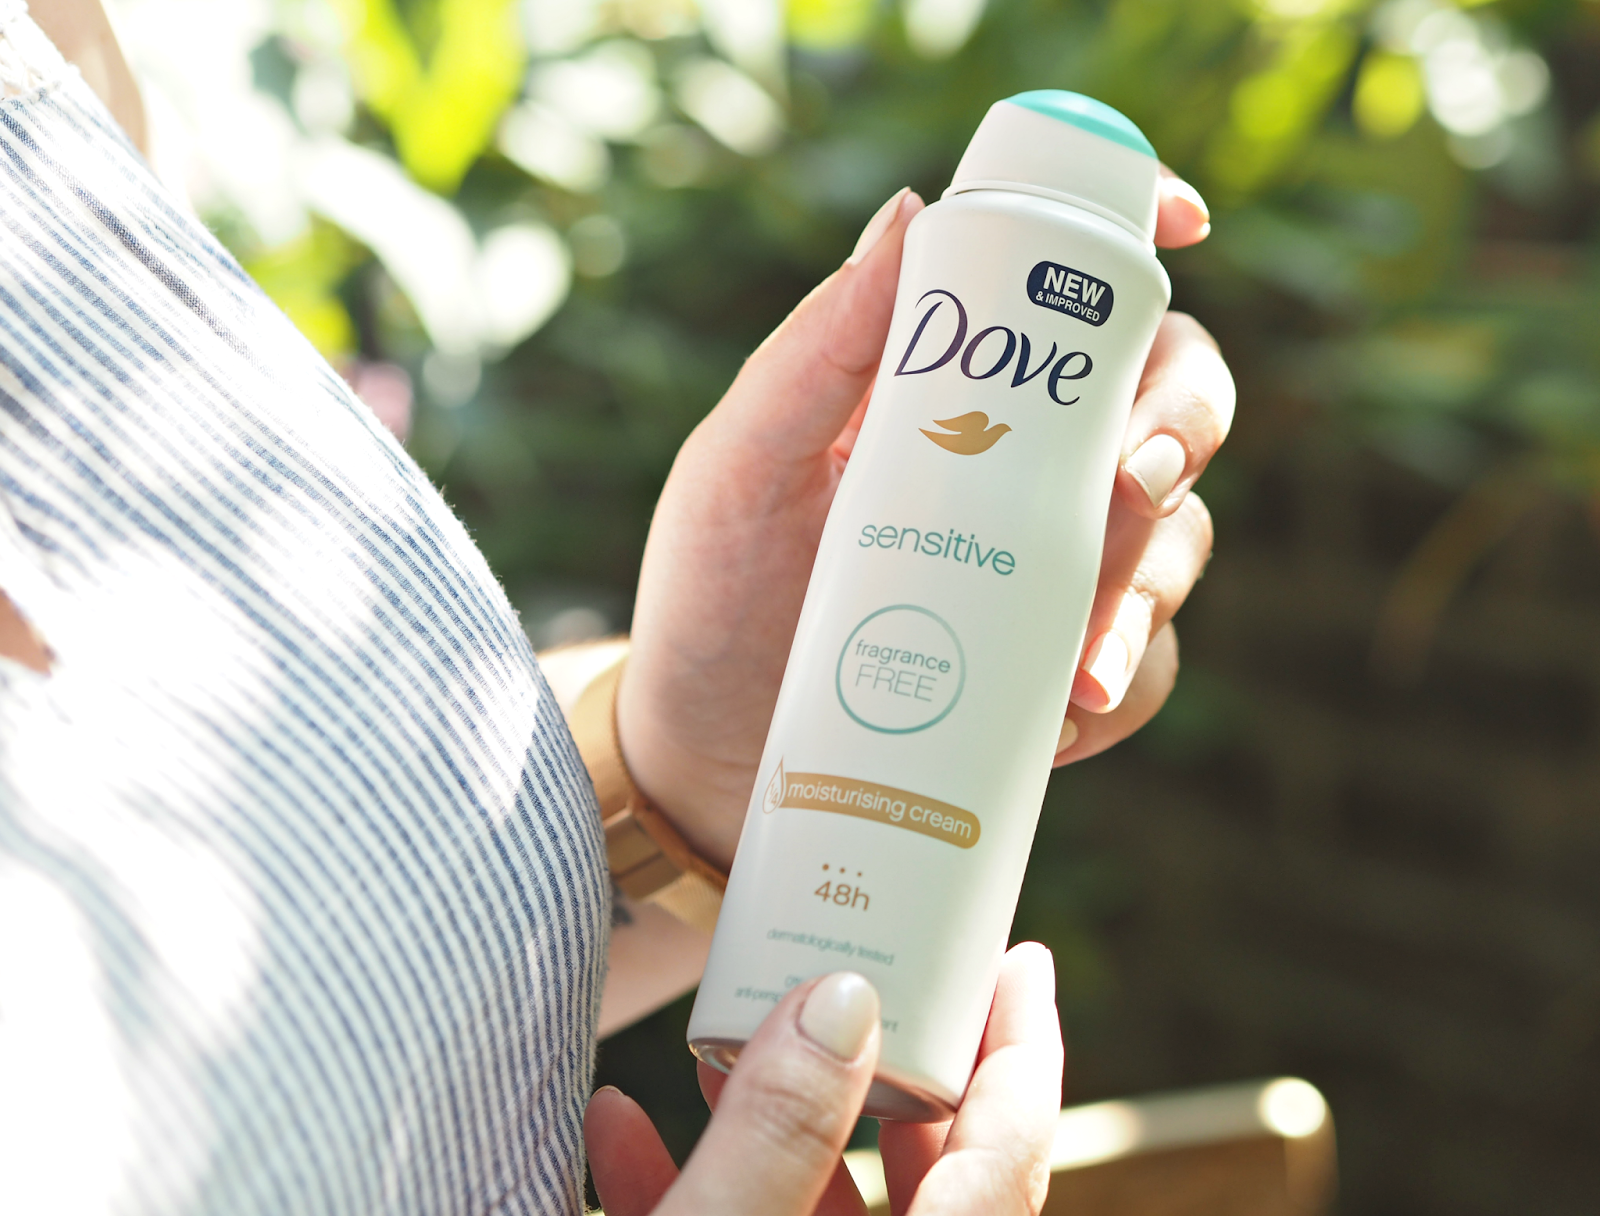 Reveal Your Underarms: Introducing Dove's New Anti-Perspirant Formulation That's Formulated With Luxury Skincare Ingredients